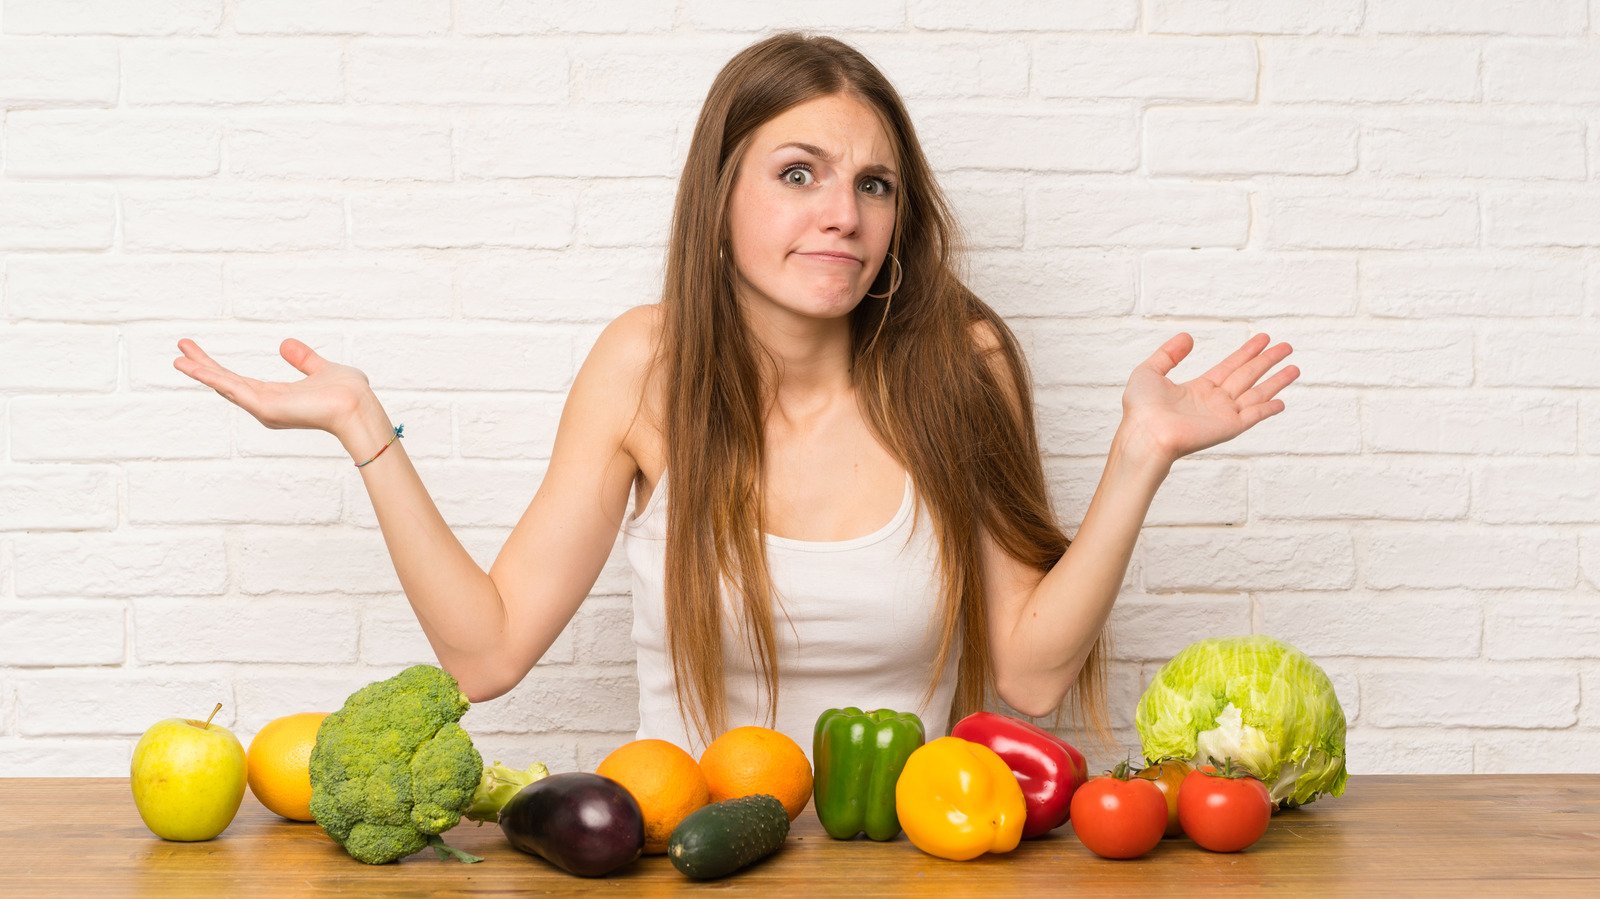 Fruits Vs. Vegetables: What's The Difference For Your Health? - Health Digest